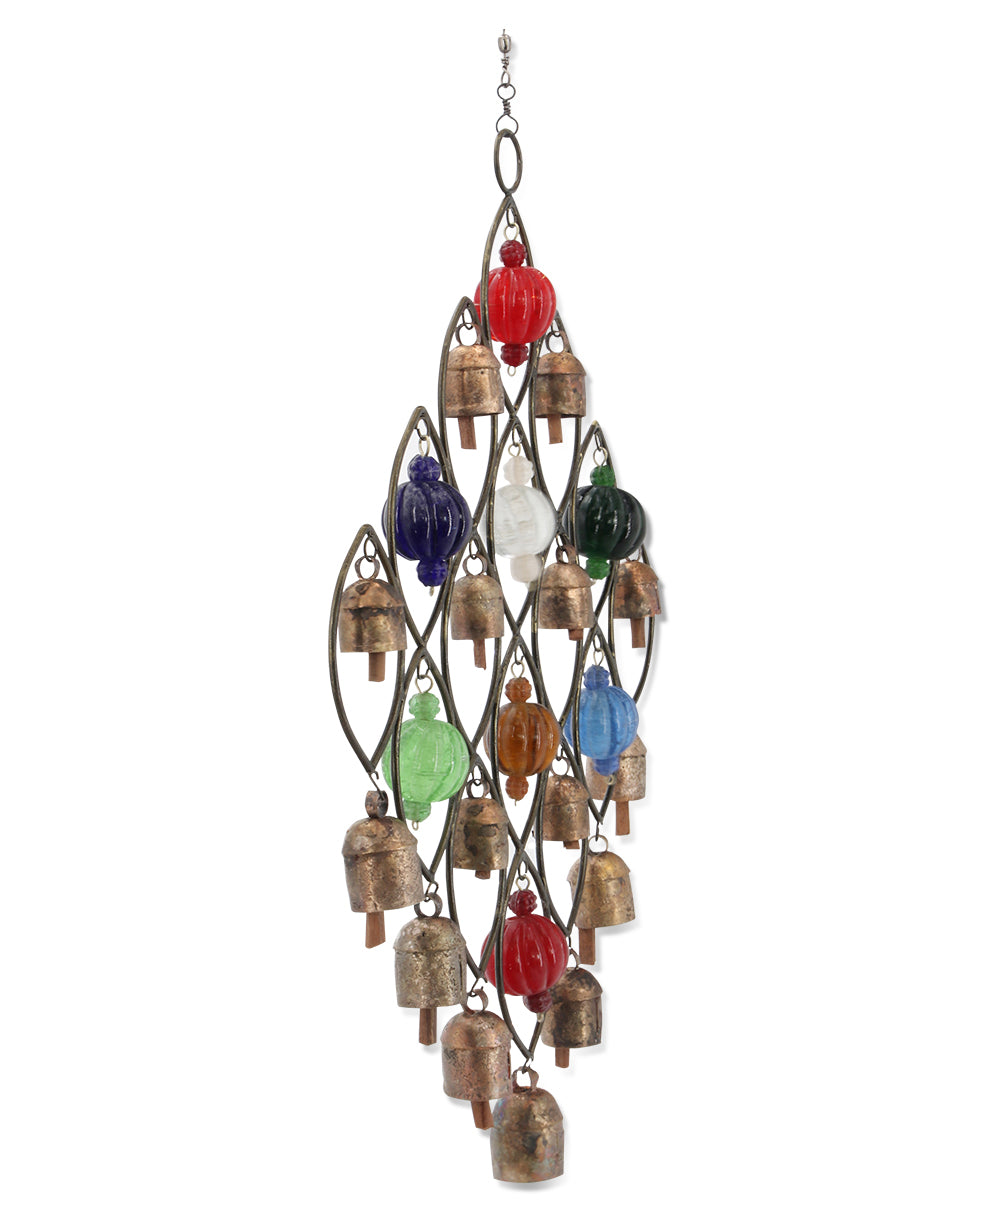 Beautifully arranged recycled metal bell chime wall hanging in home or garden